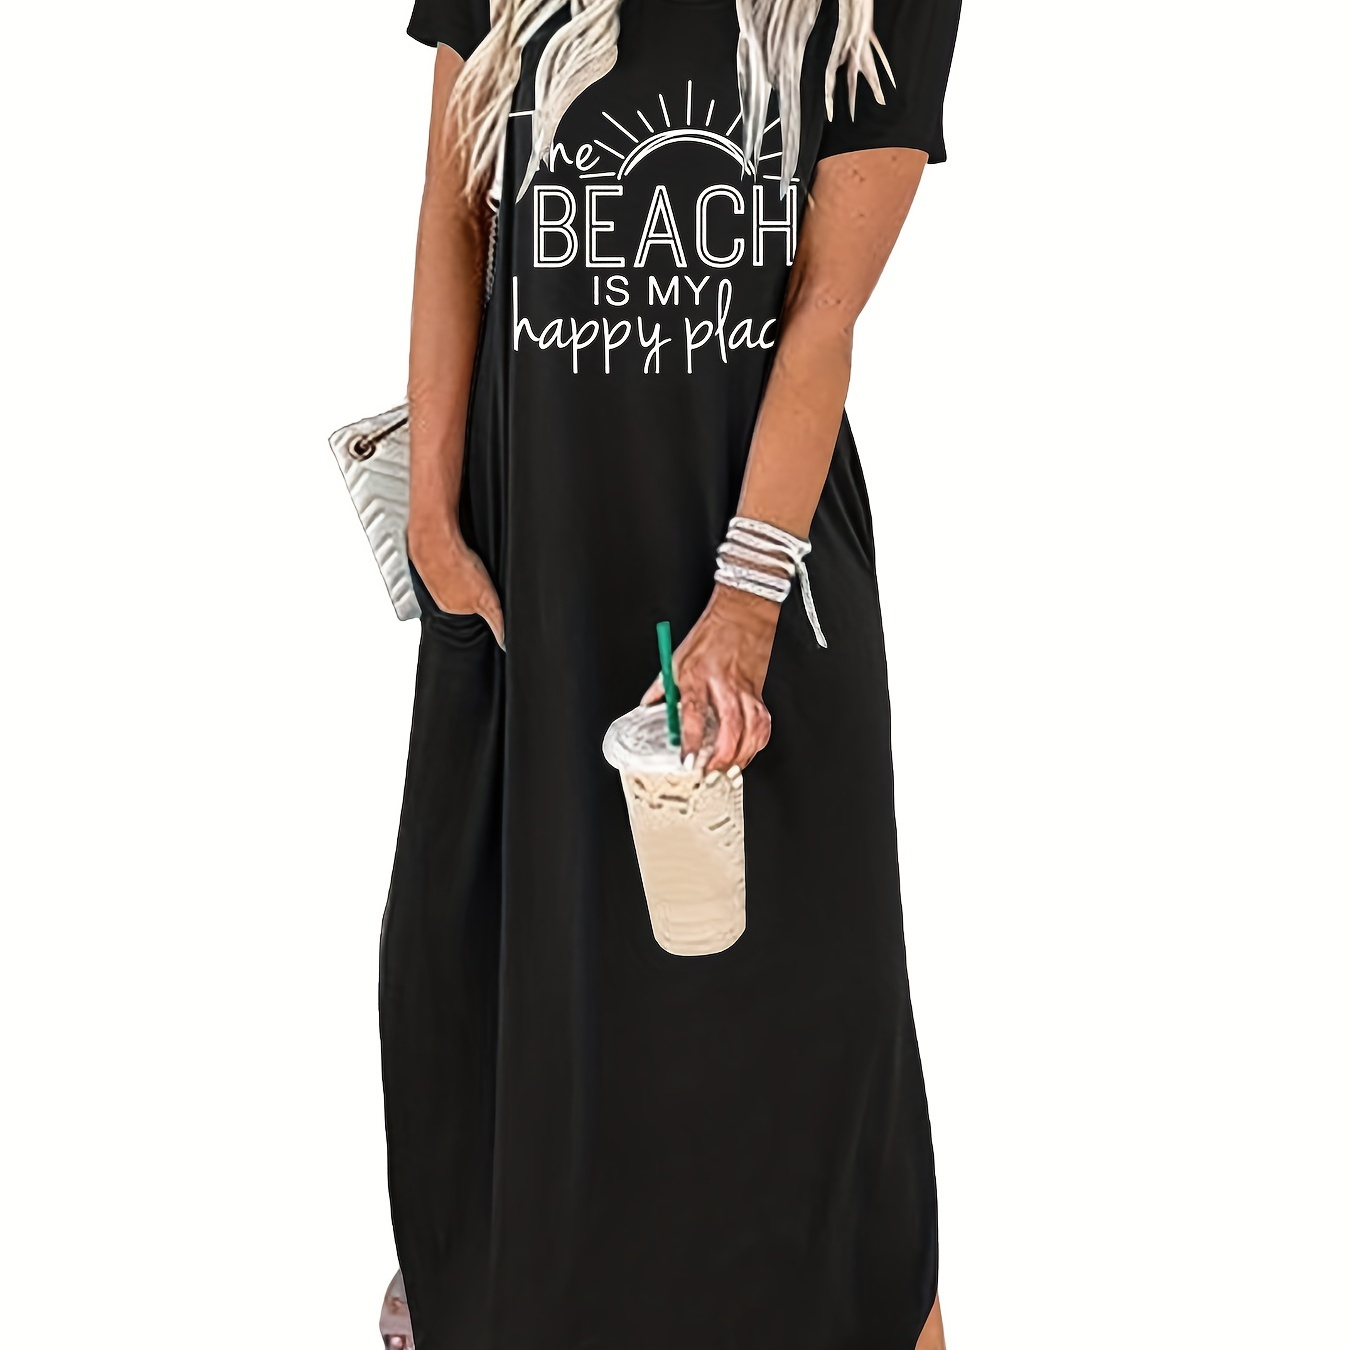 

The Beach Is My Happy Place Print Dress, Casual Crew Neck Short Sleeve Maxi Dress, Women's Clothing